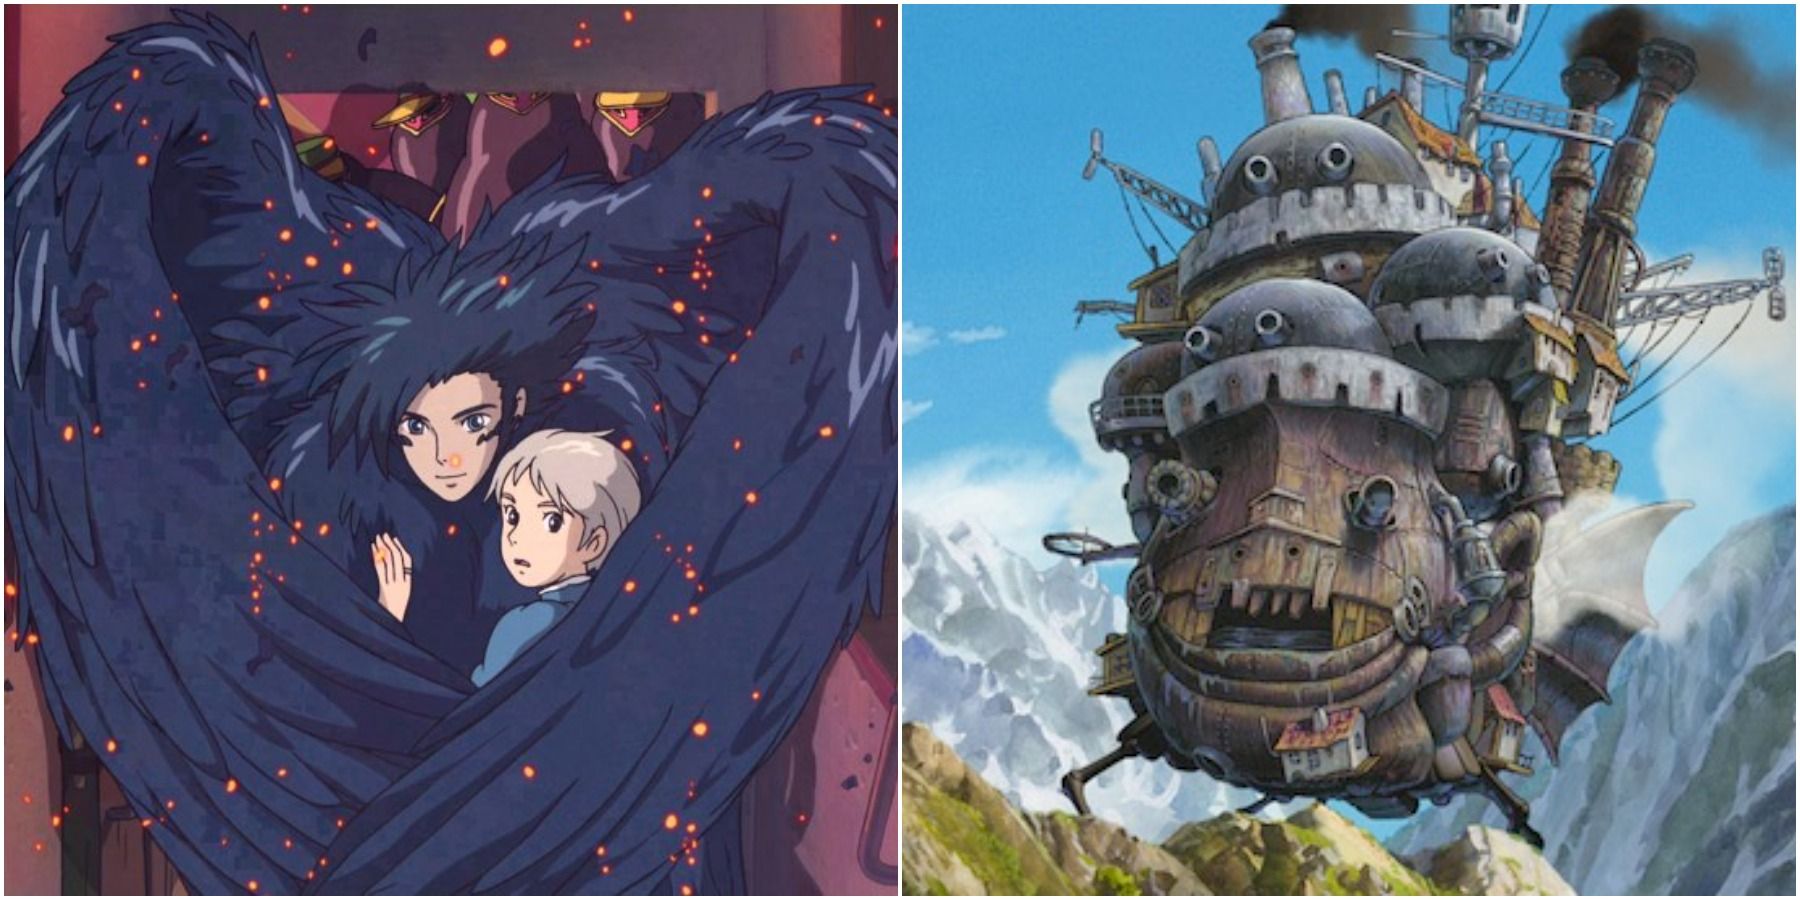 Split image of Howl, Sophie, and the moving castle.